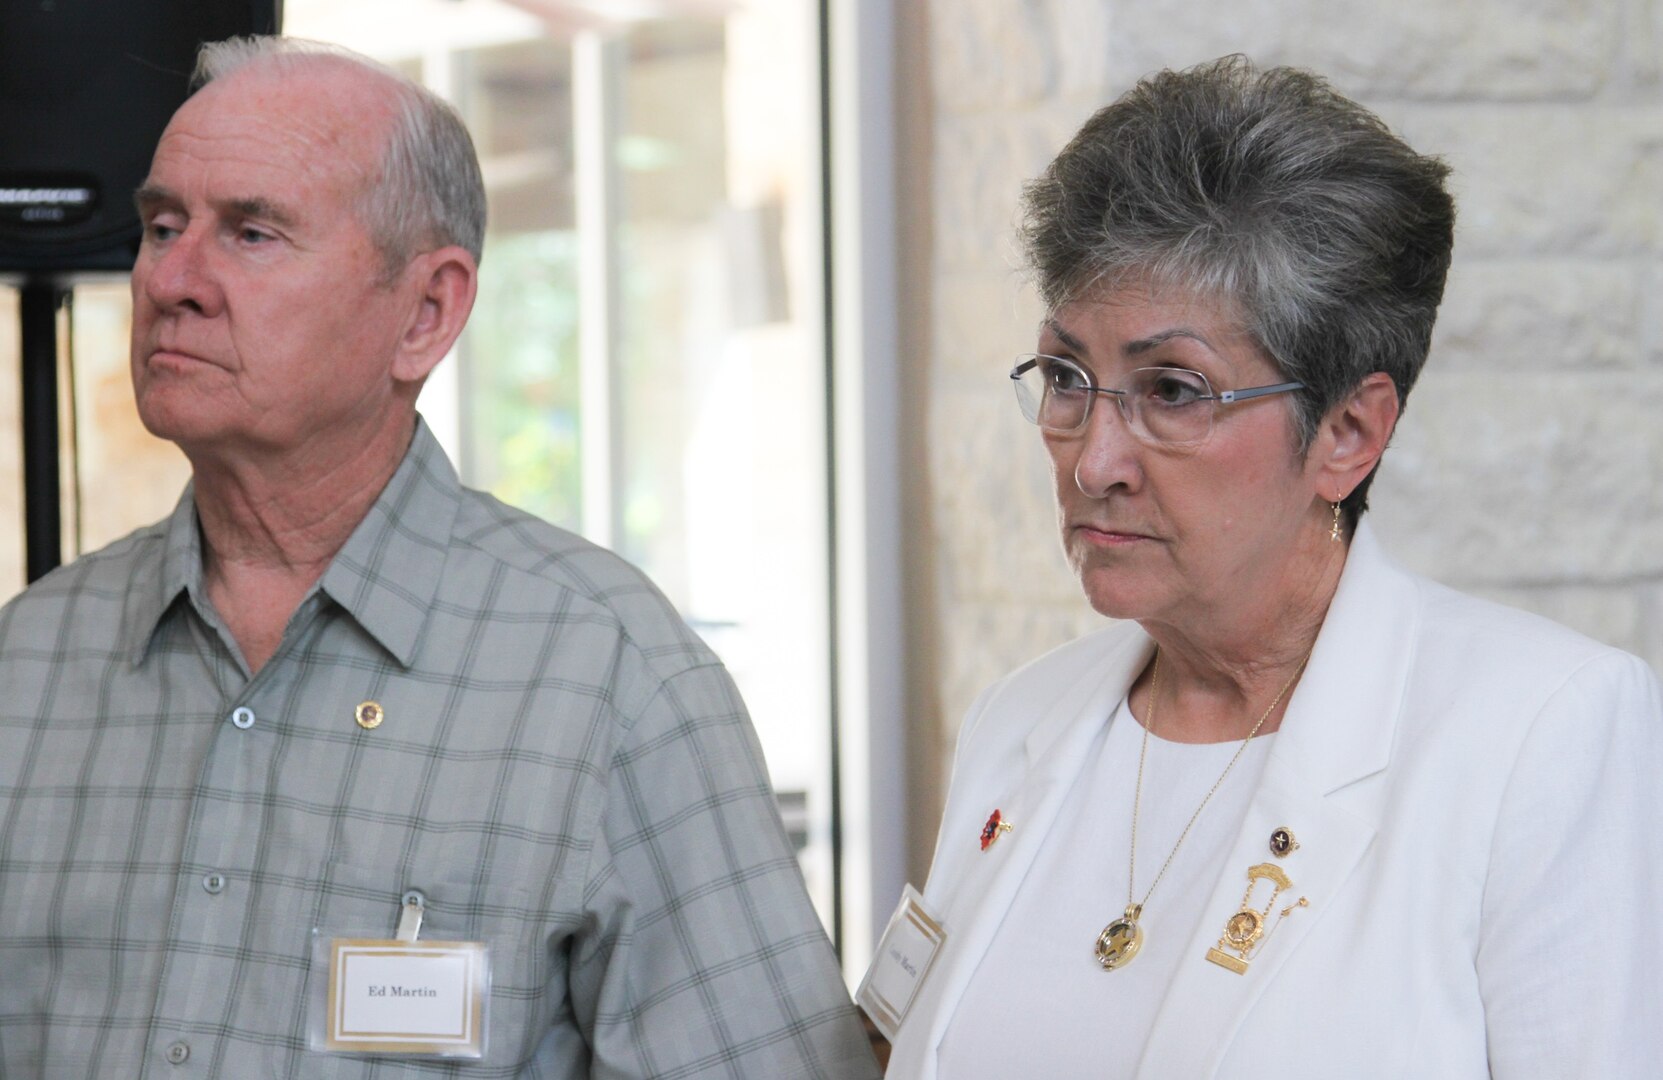 Candy Martin (right), the Army Reserve Ambassador for the 63d Regional Support Command, Mountain View, Calif., listens to a presentation with her husband Ed Martin during the Gold Star Mothers and Family luncheon Sept. 24 at the Warrior and Family Support Center at Joint Base San Antonio-Fort Sam Houston. Held every year on Gold Star Mothers' Day, the event honors family of U.S. service members who have fallen in the line of duty.